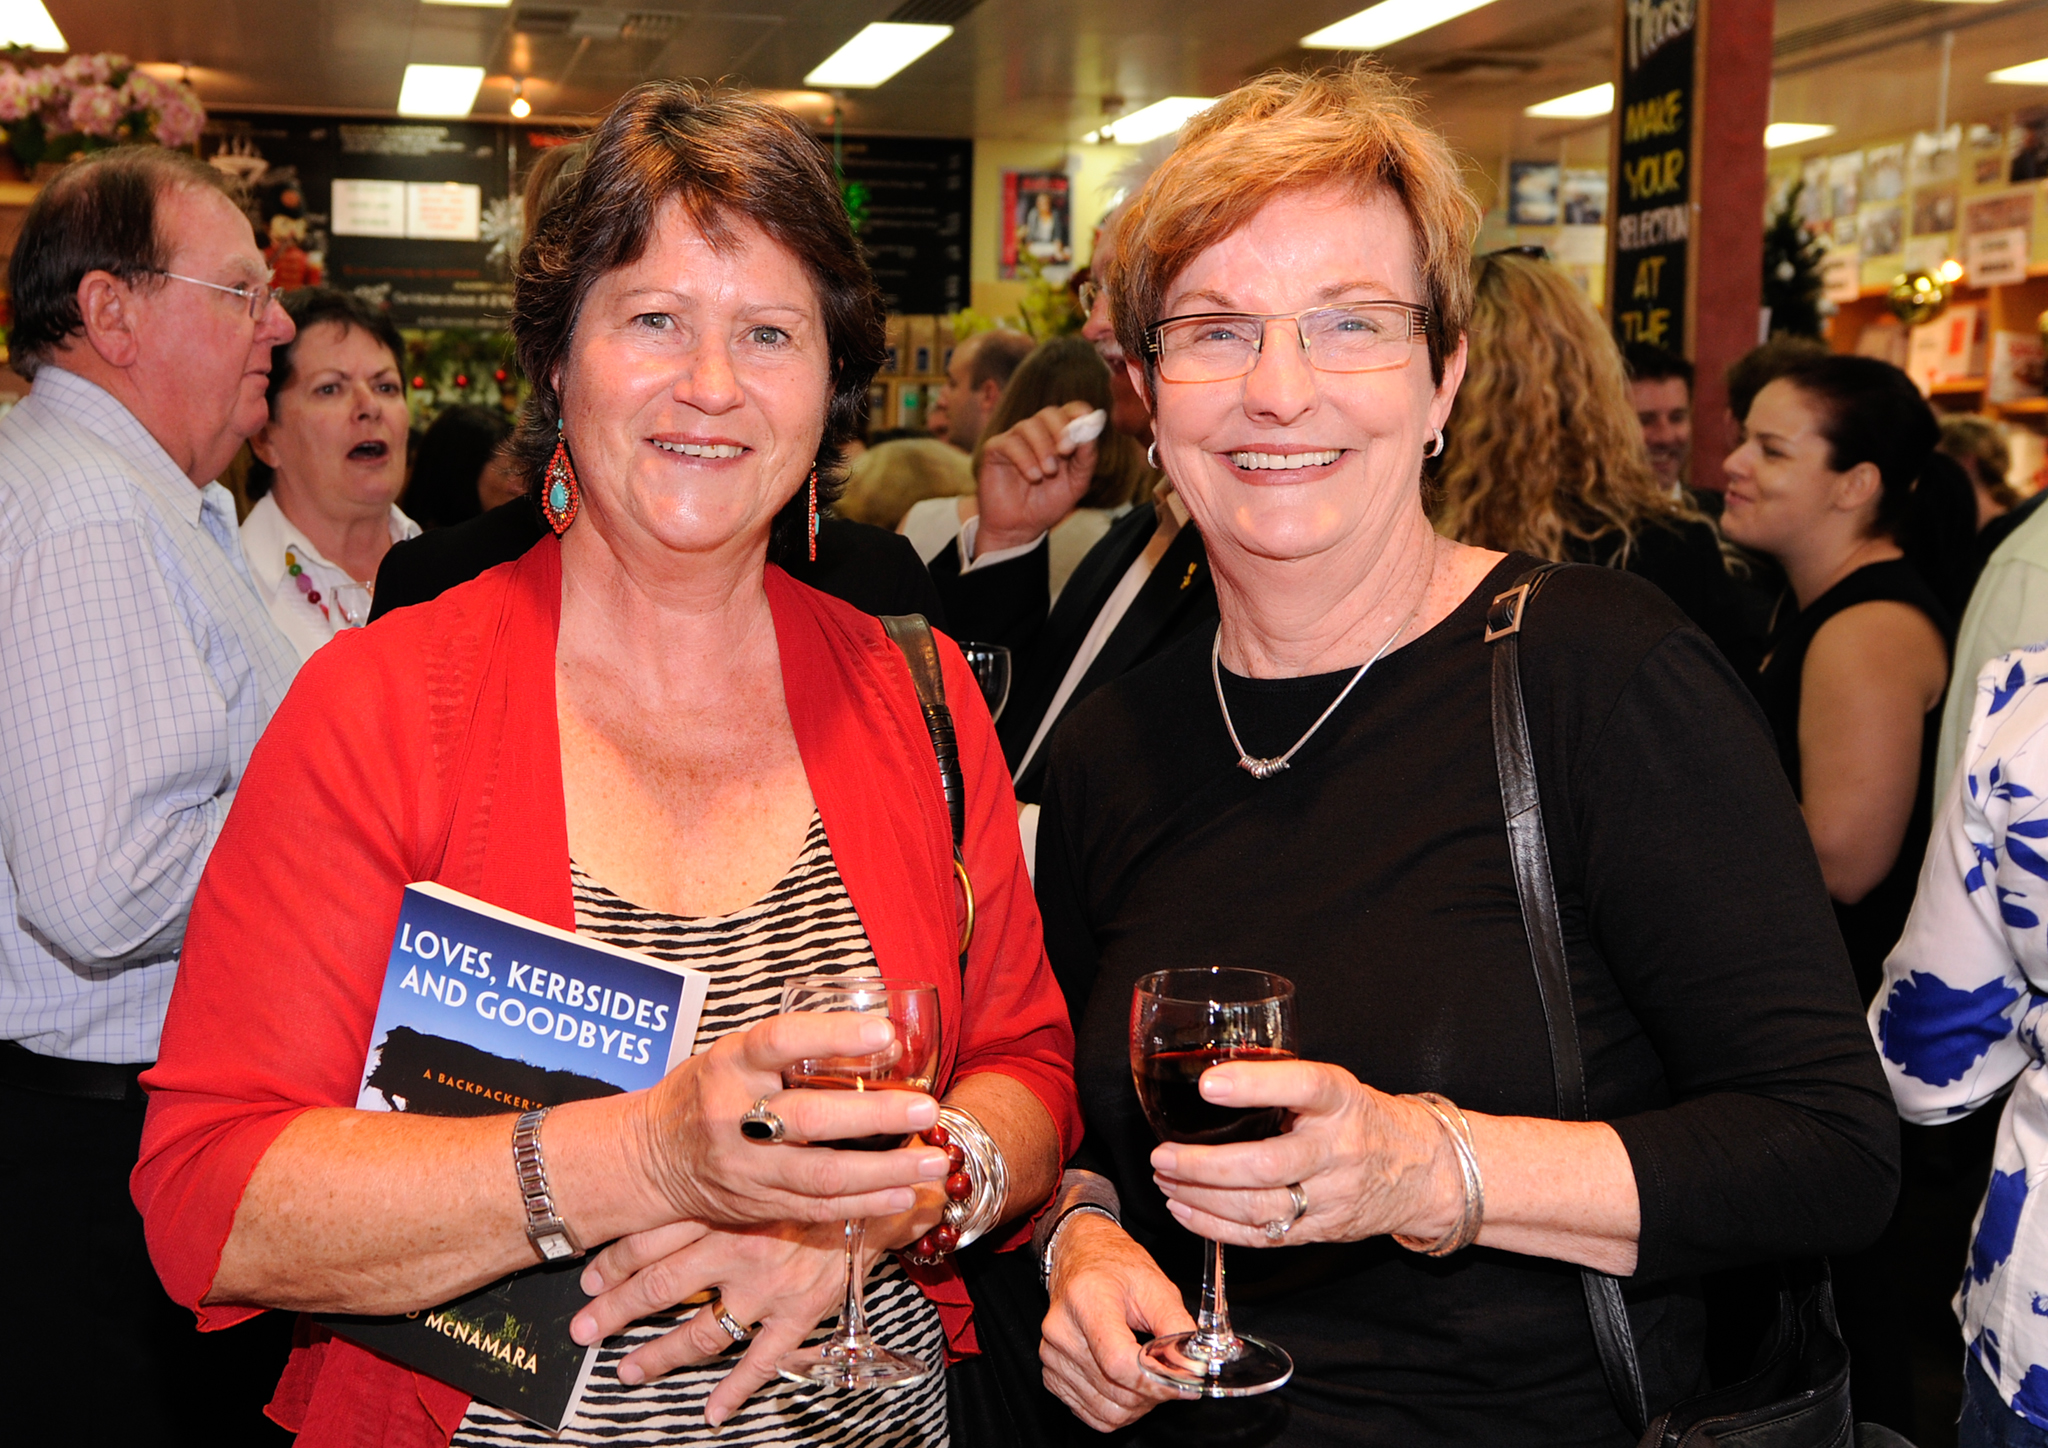 Family and Friends at the Book Launch